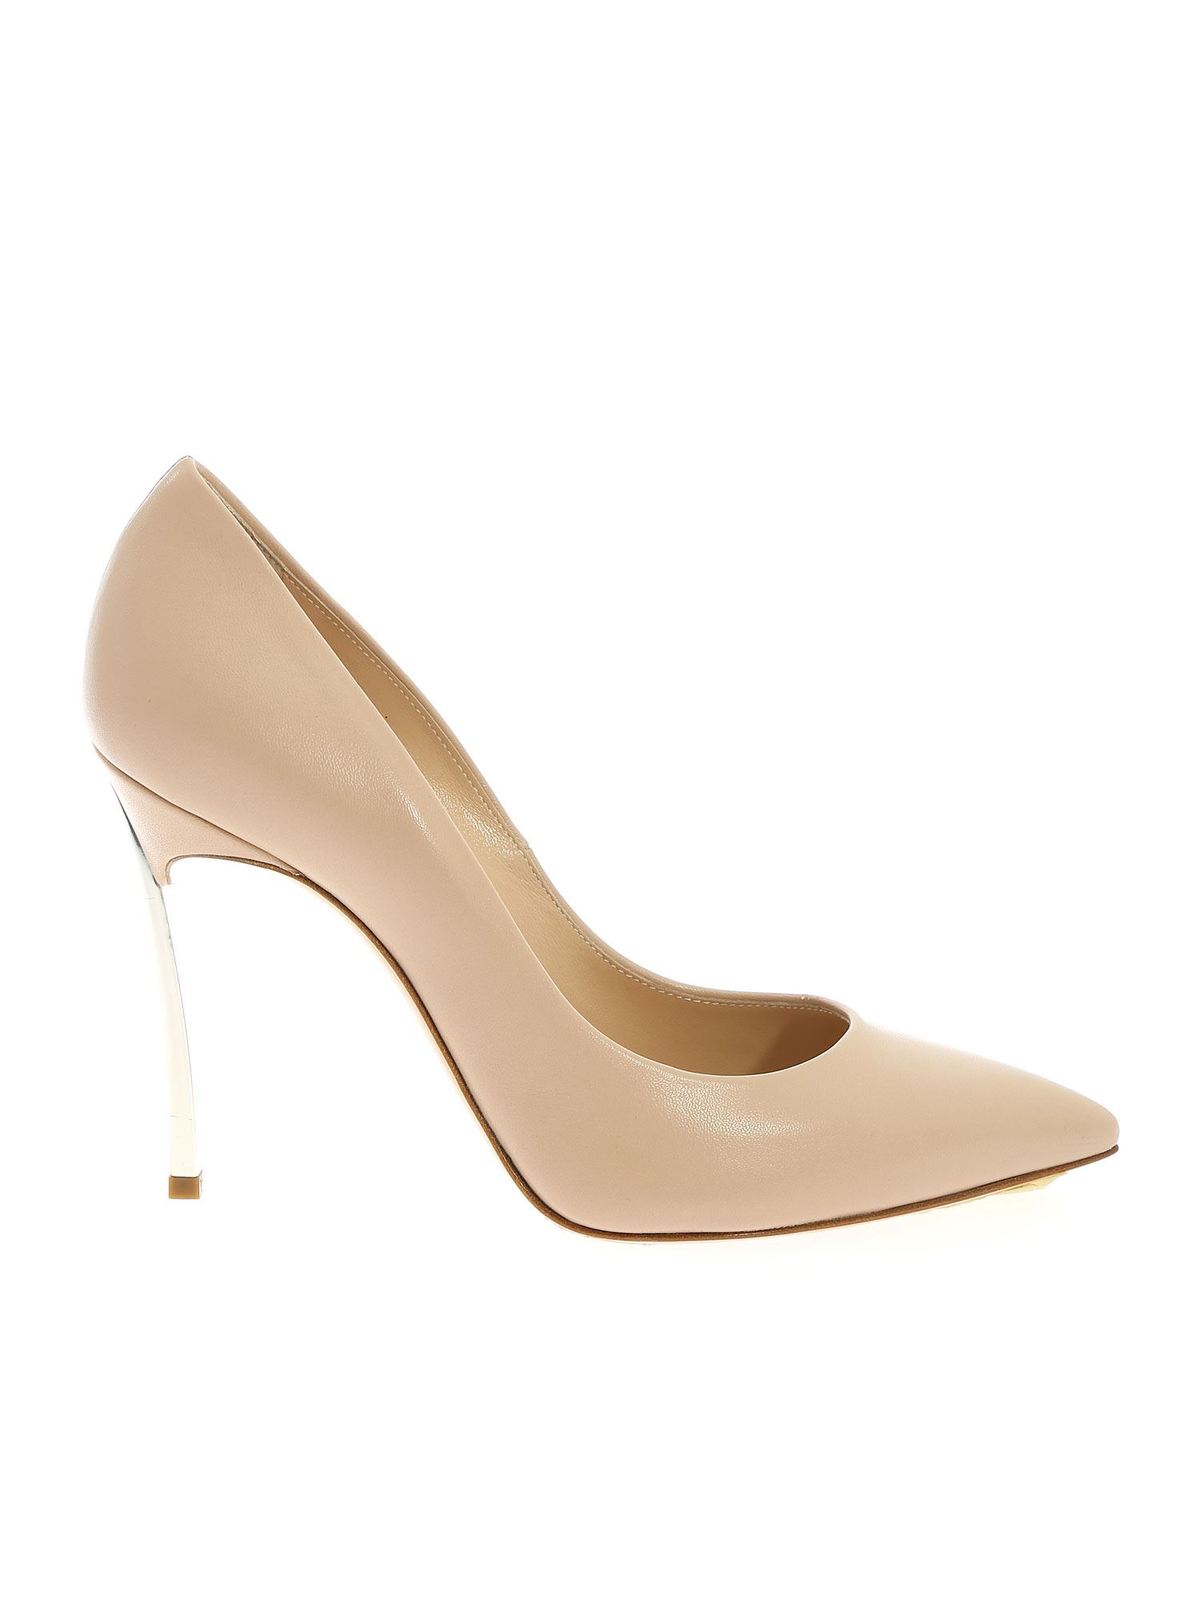 Court shoes - Blade pumps in nude color - 1F161D100MADUSE2801